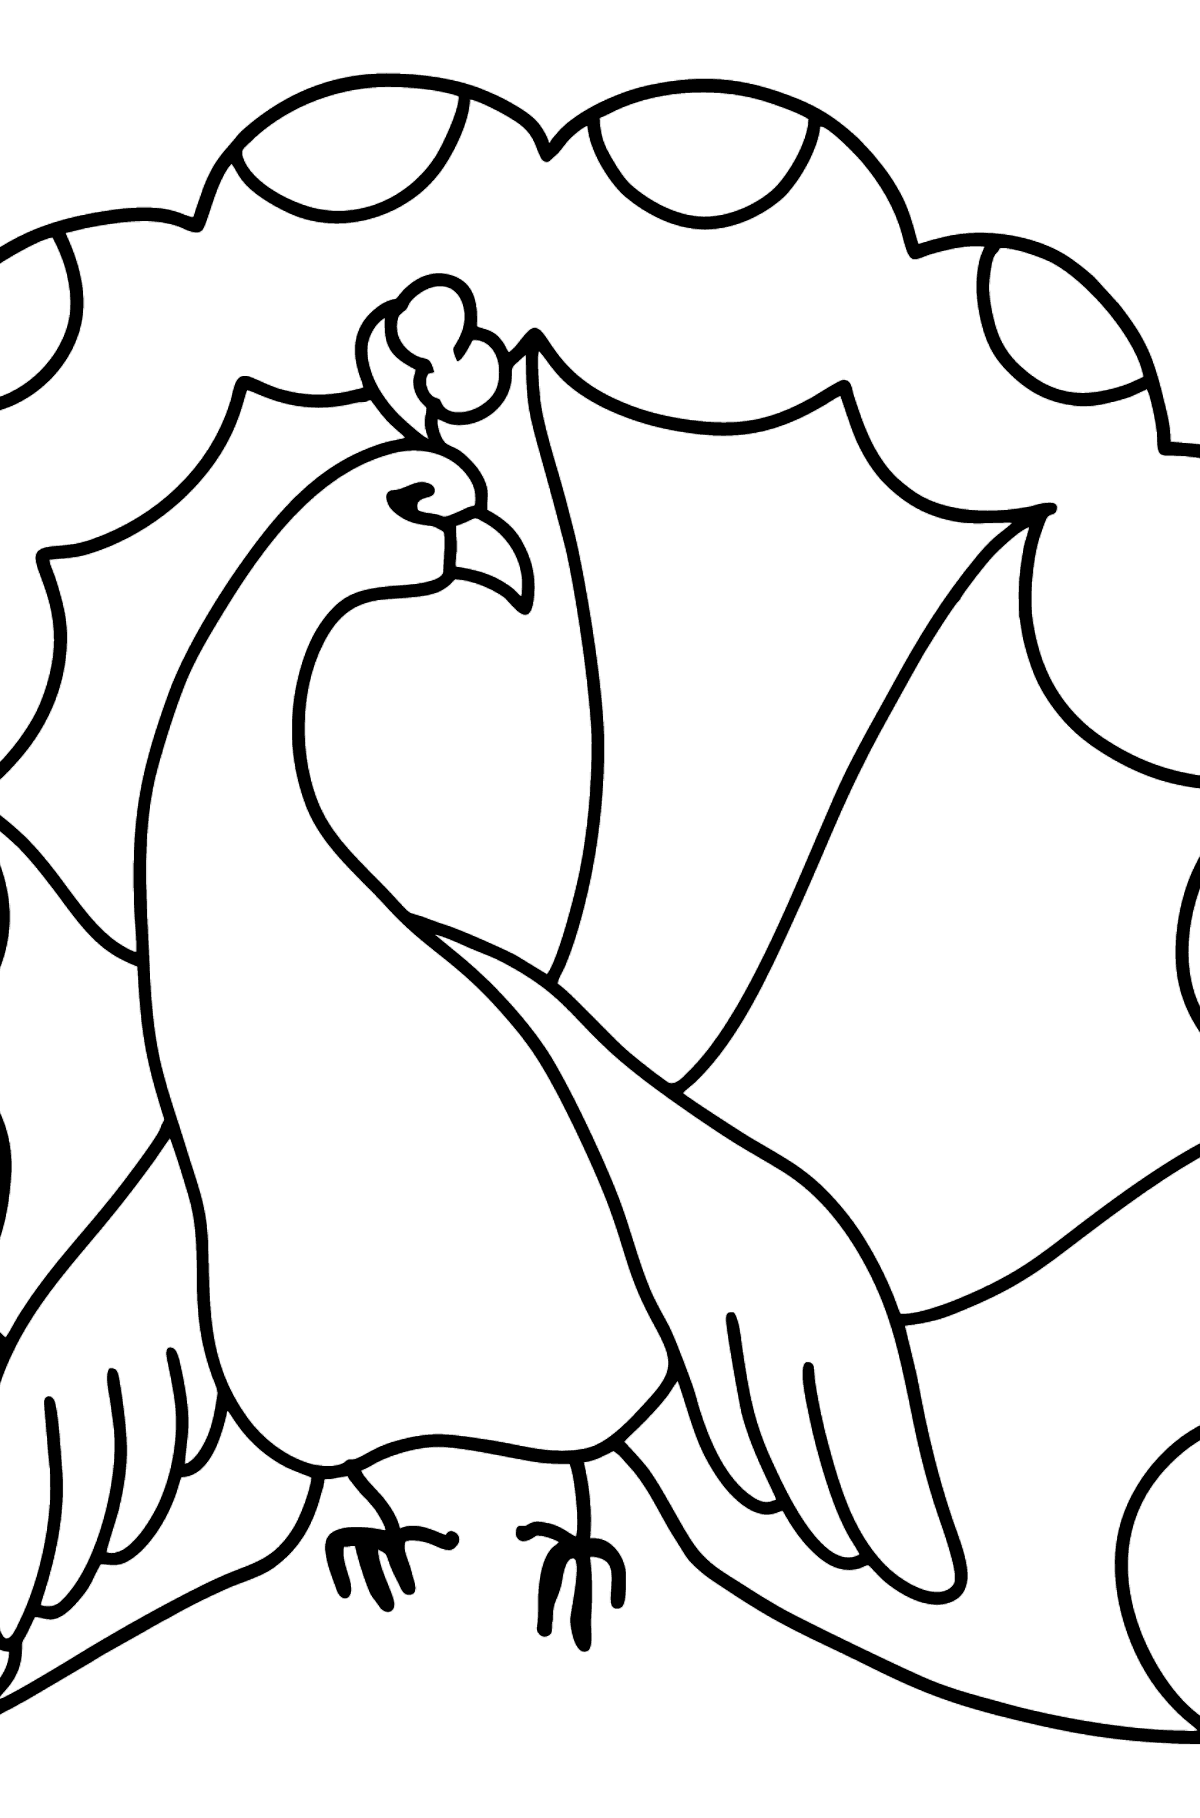 Peacock coloring page - Coloring Pages for Kids